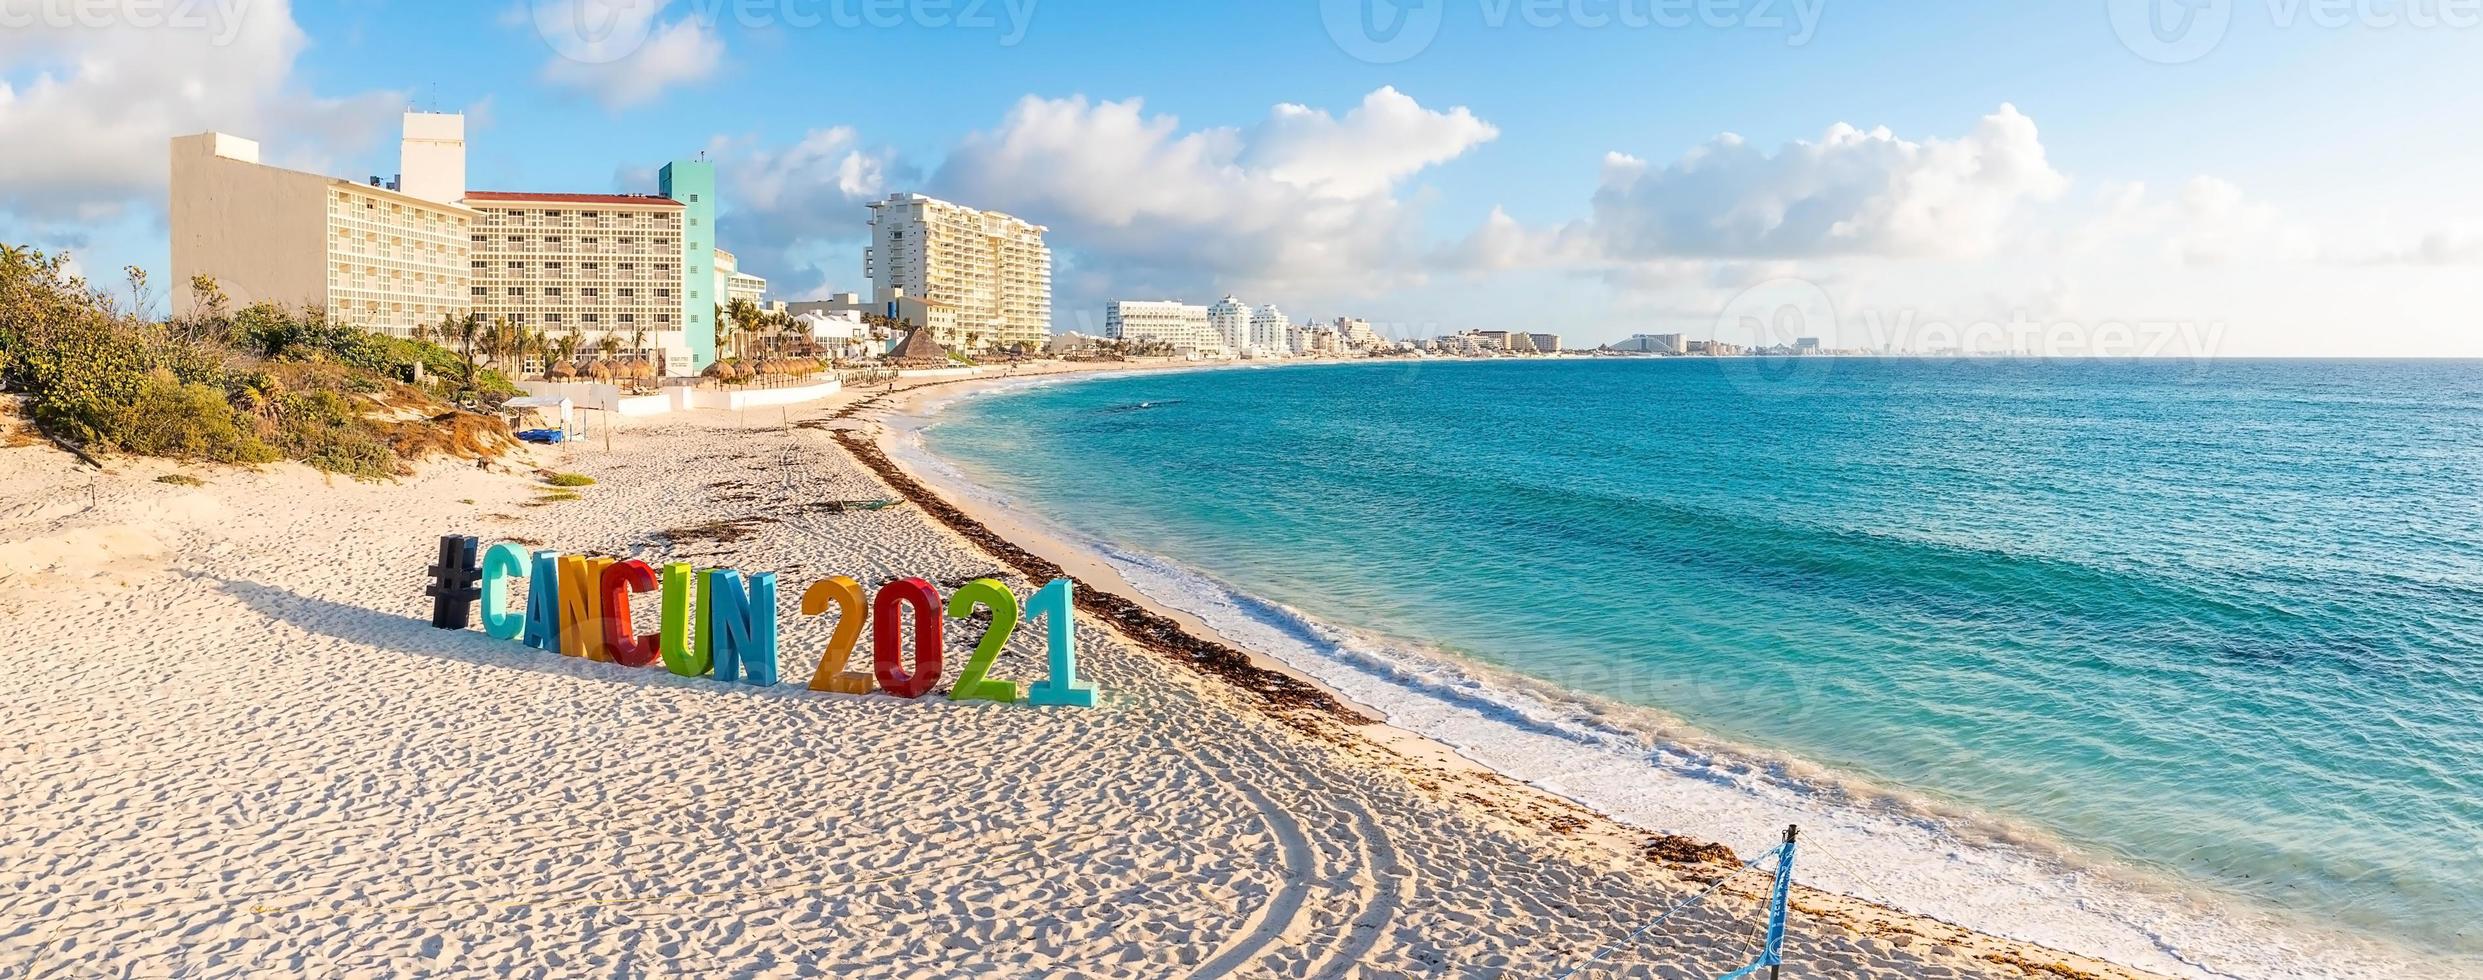 View of the Cancun 2021 sign photo